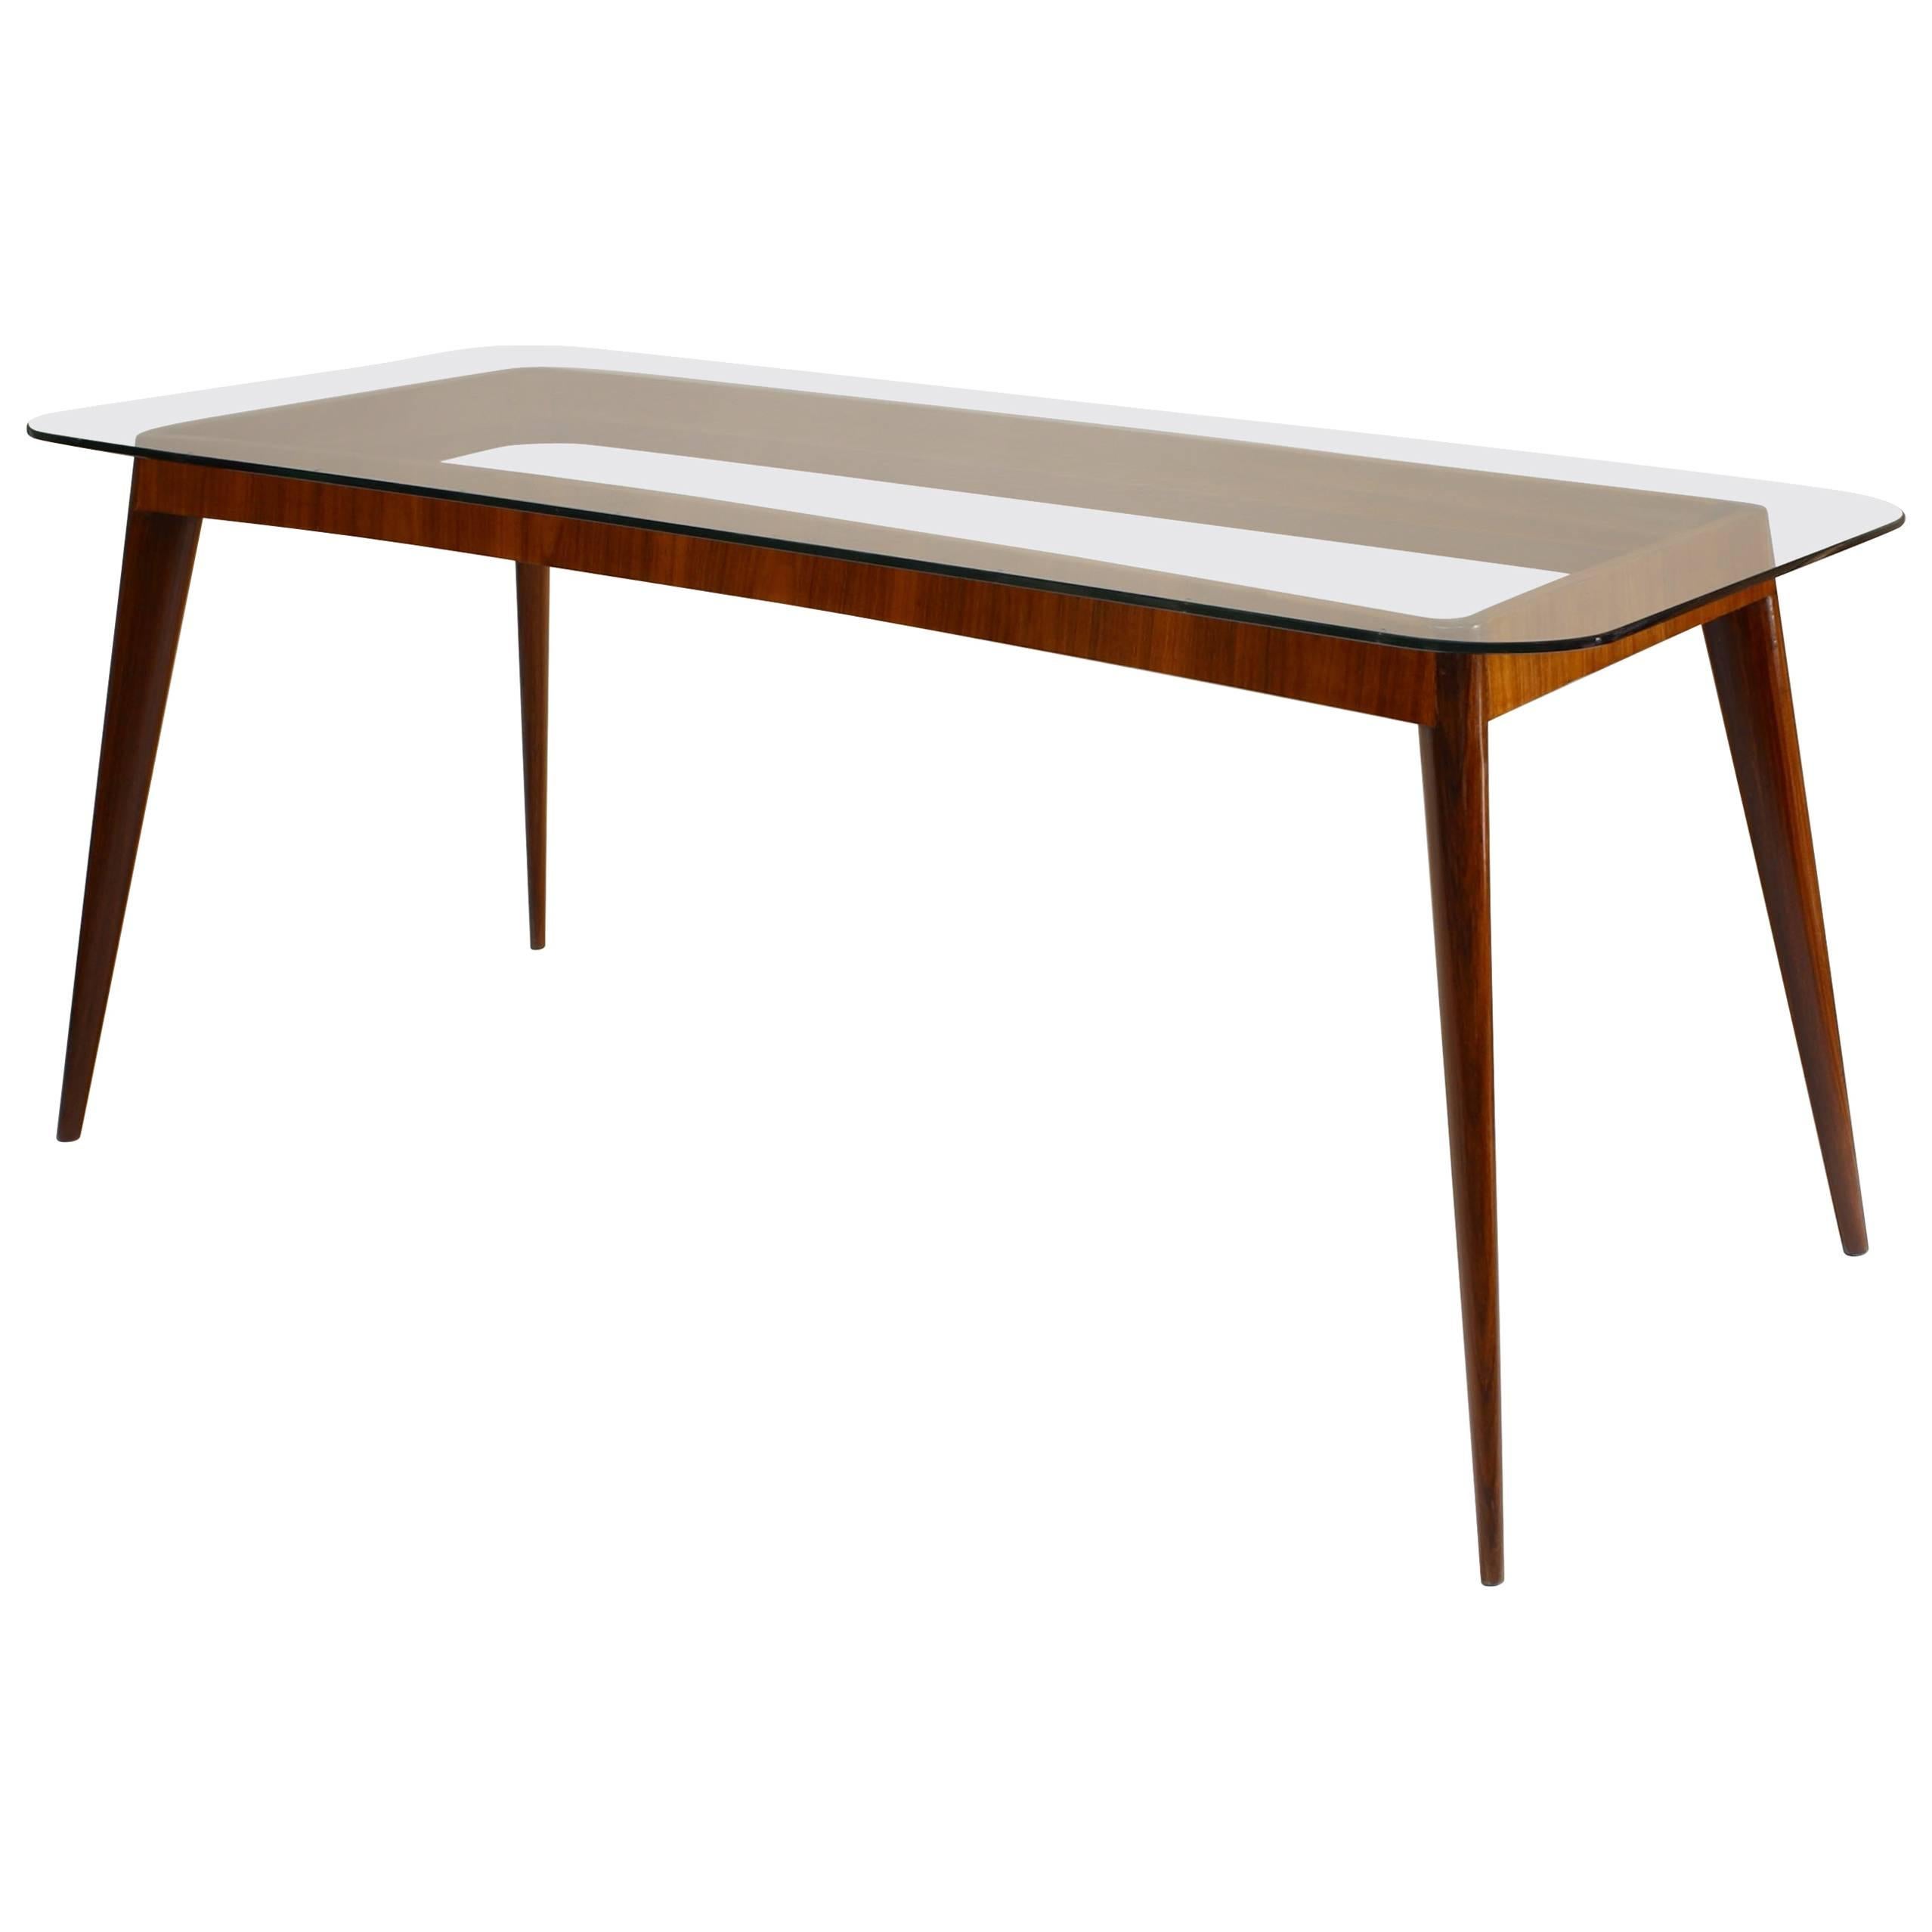 Italian Mid-Century Rosewood and Glass Dining Table